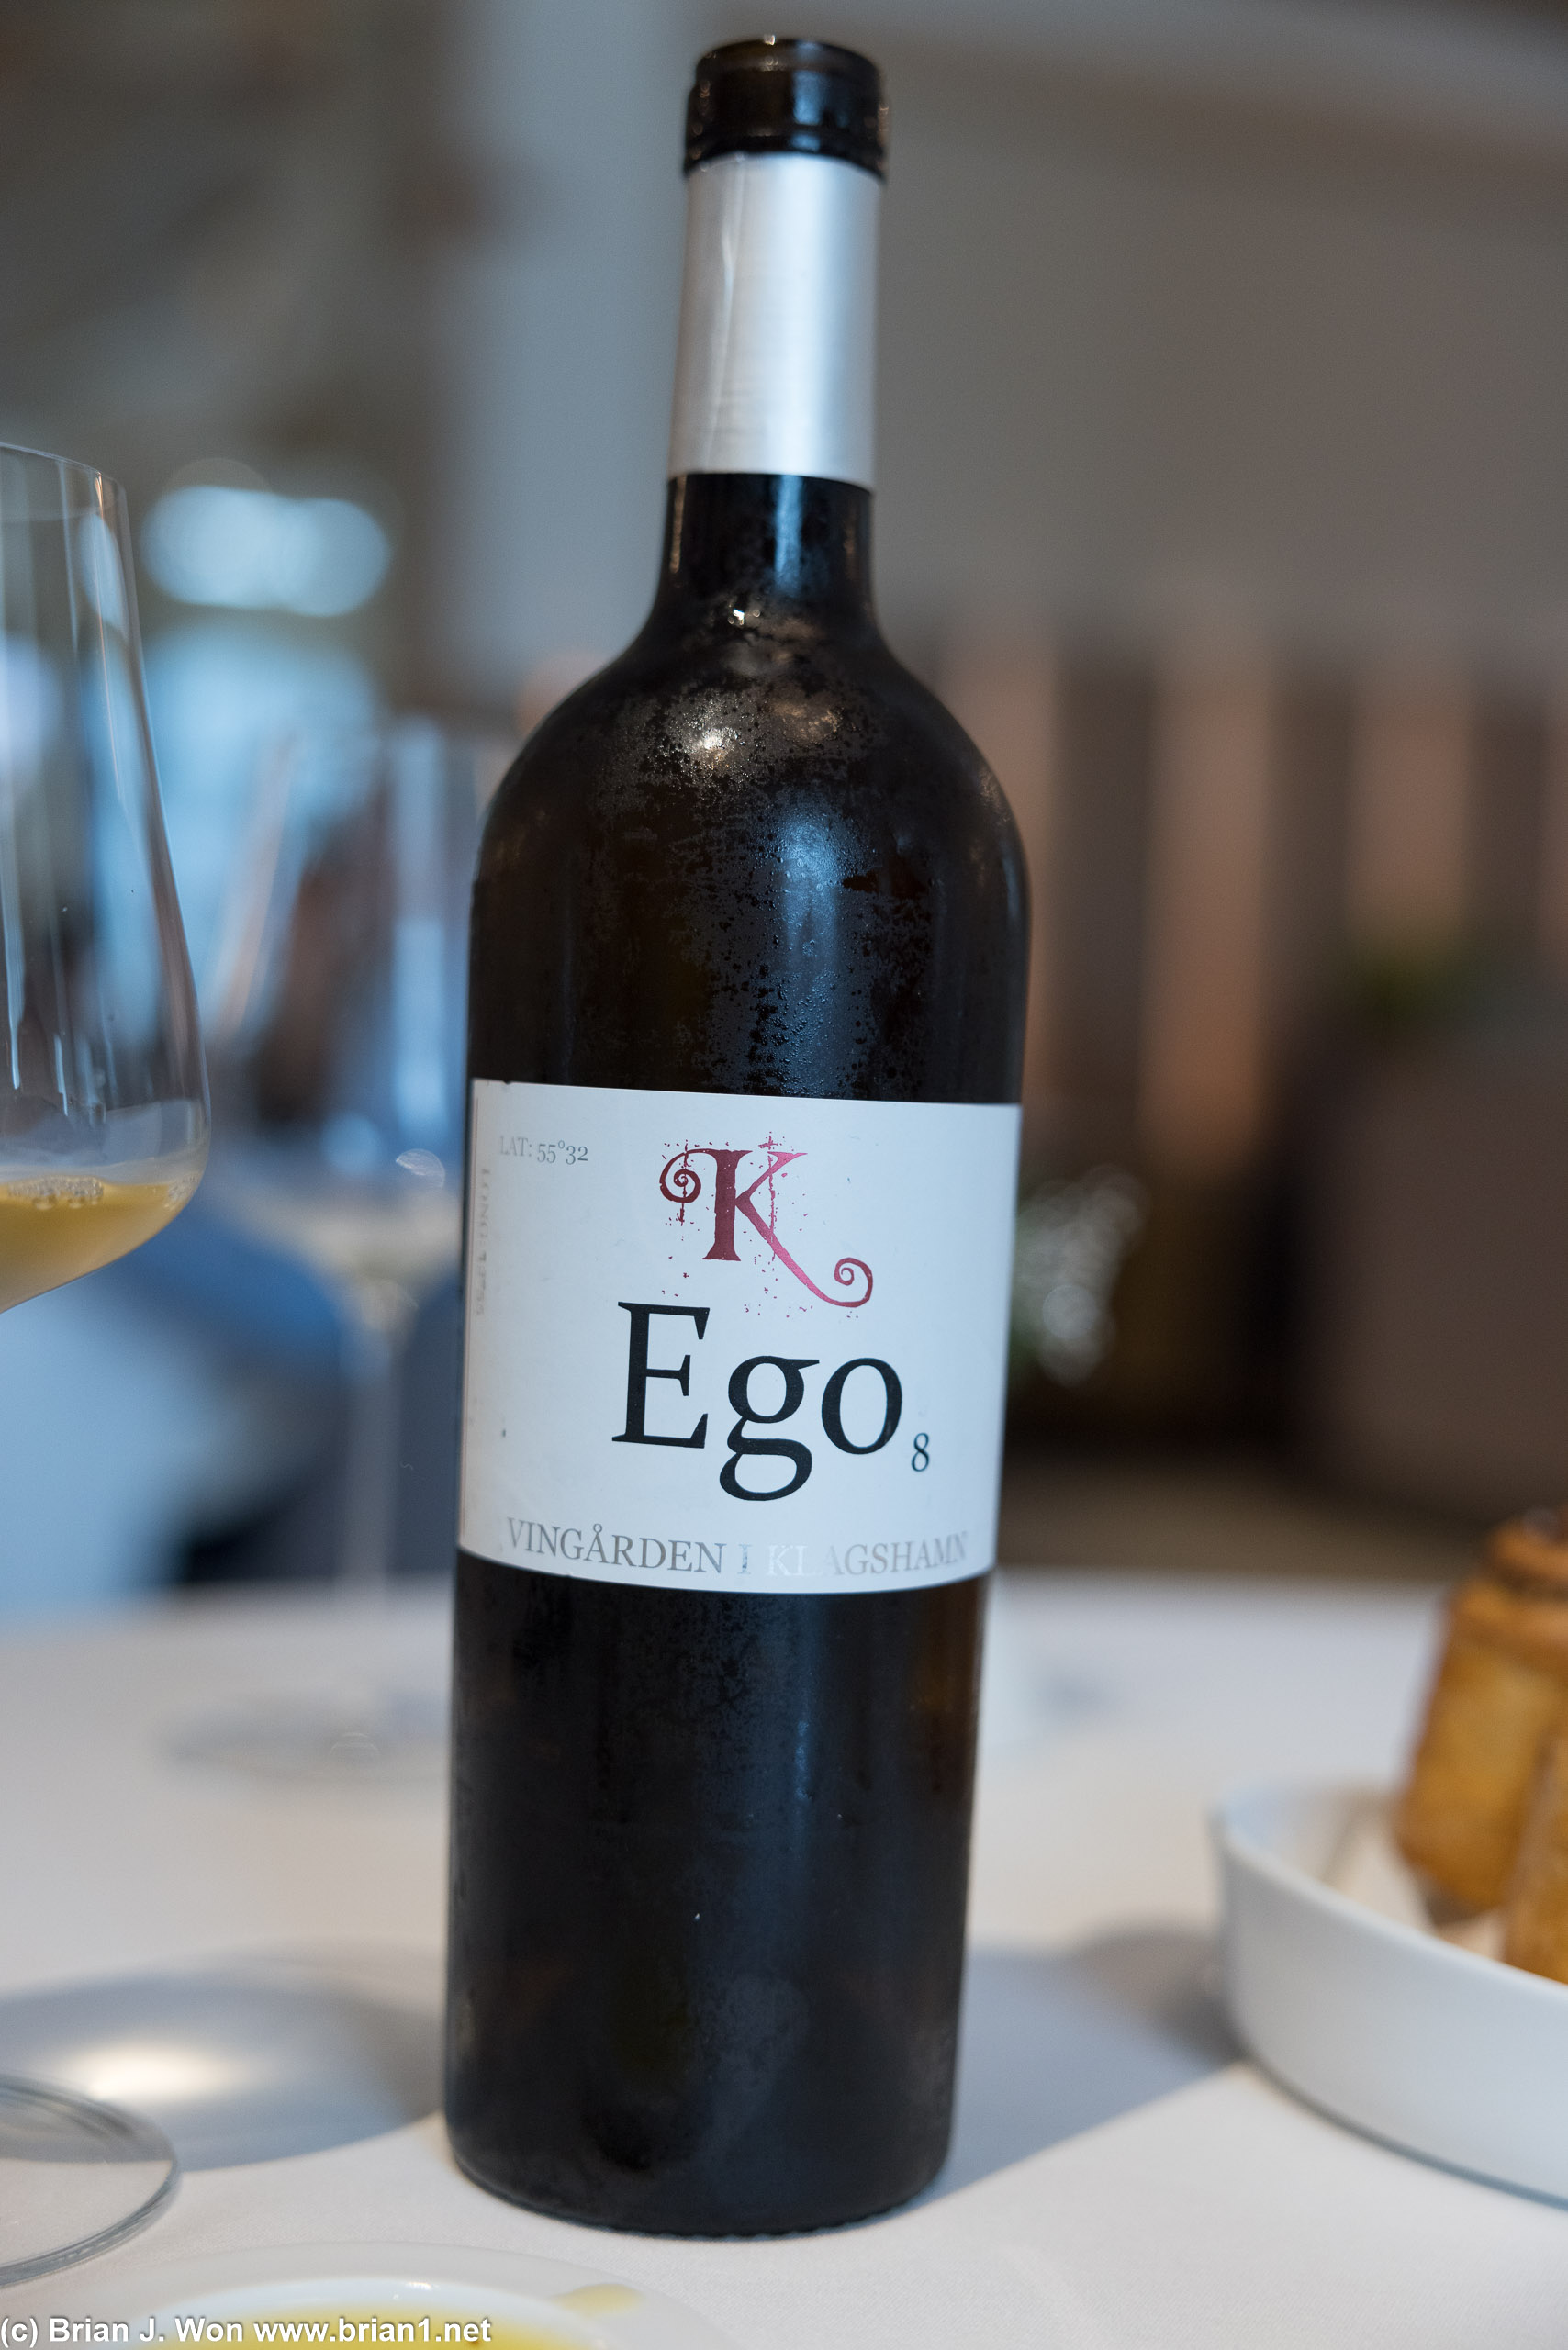 Sweden Ego 8. Solaris grapes, line and flint-rich clay soil.